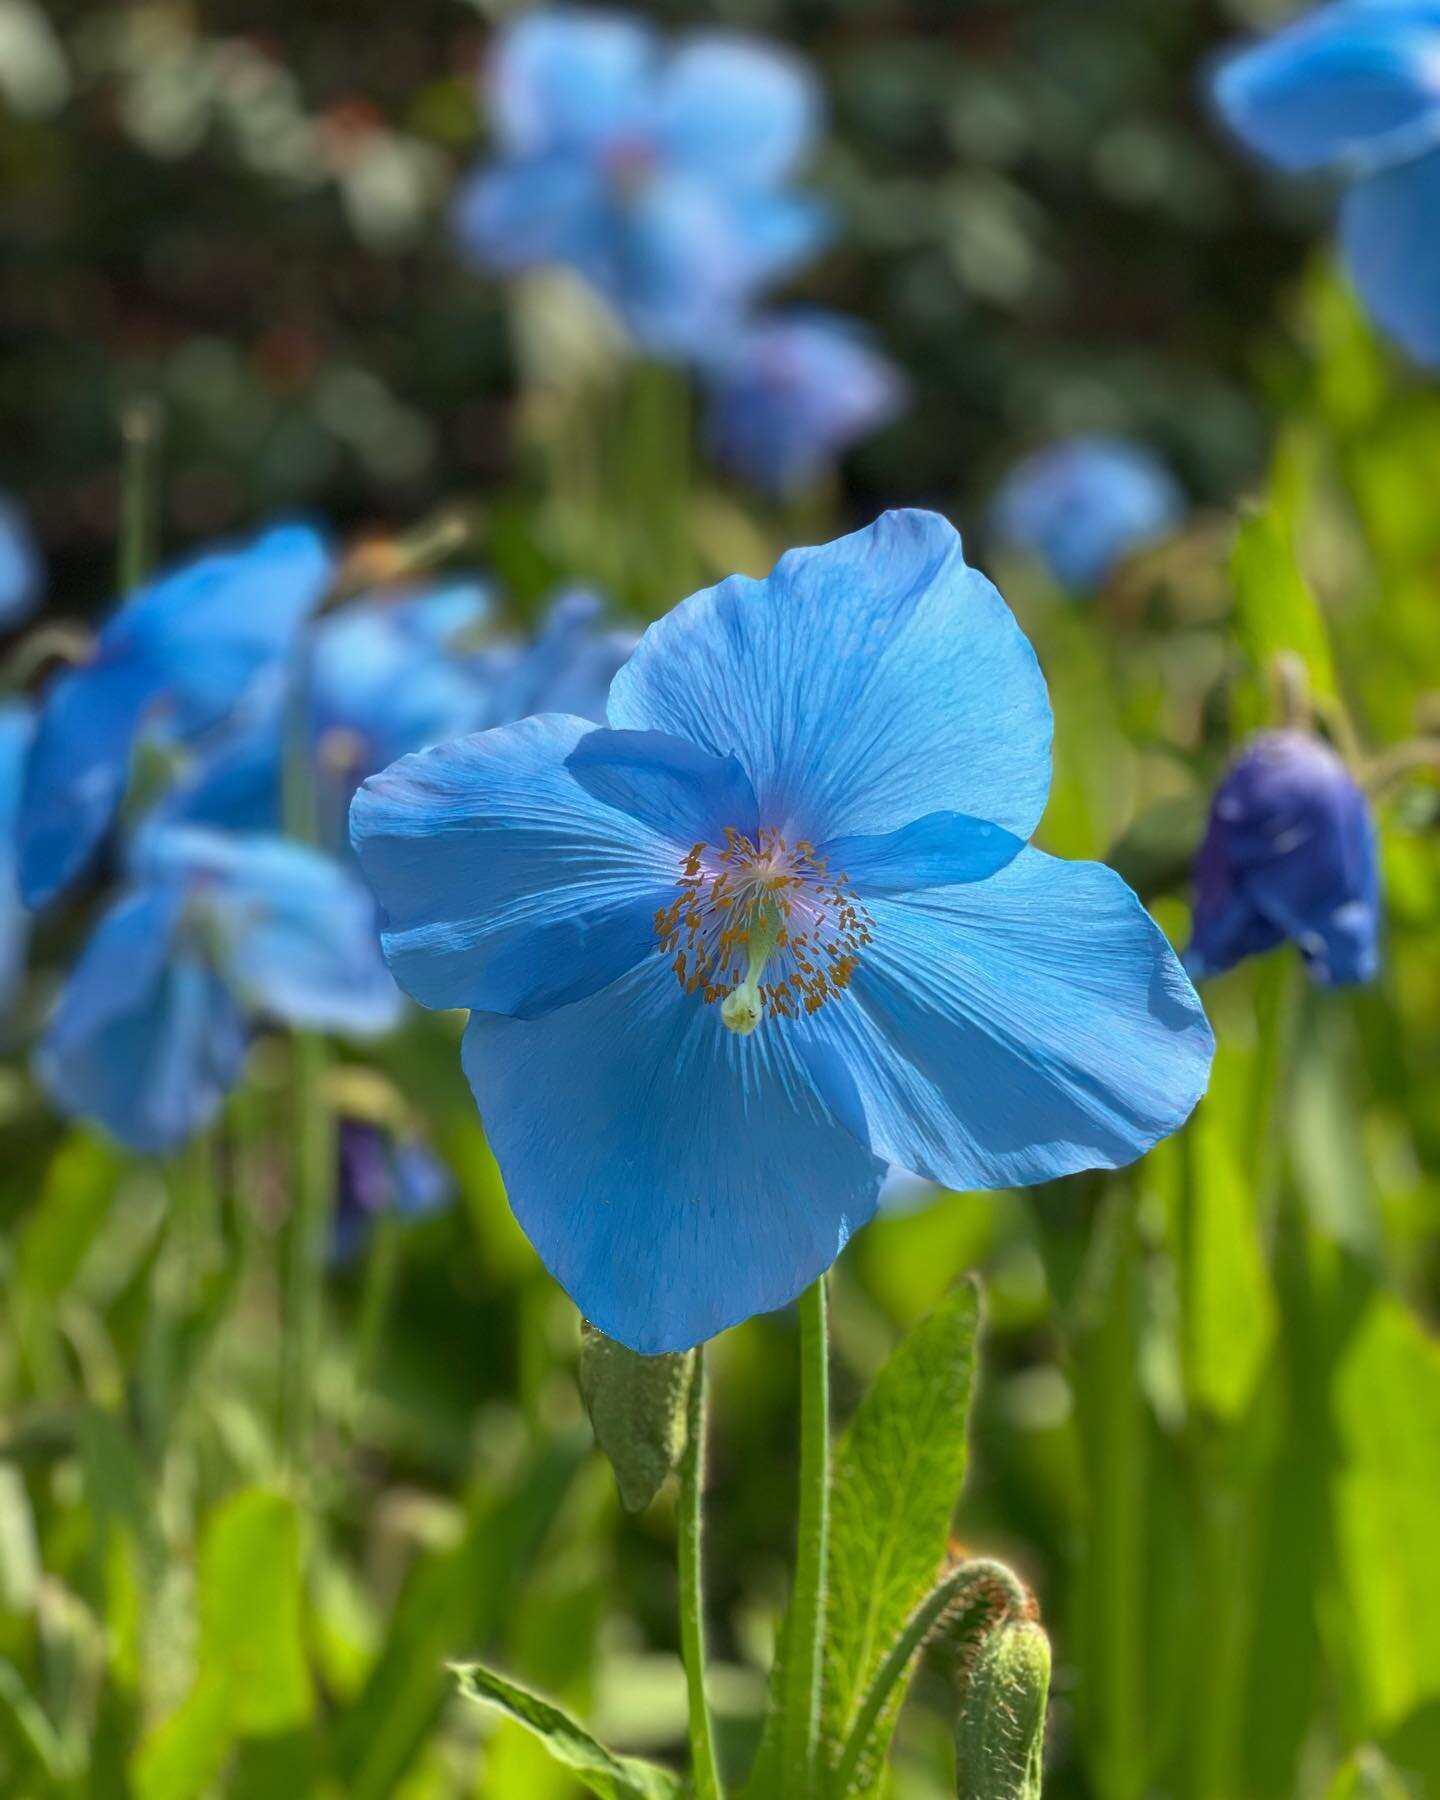 A quick break before weddings begin&hellip; amazing experience at the @rbgedinburgh  These blue poppies are breathtaking!